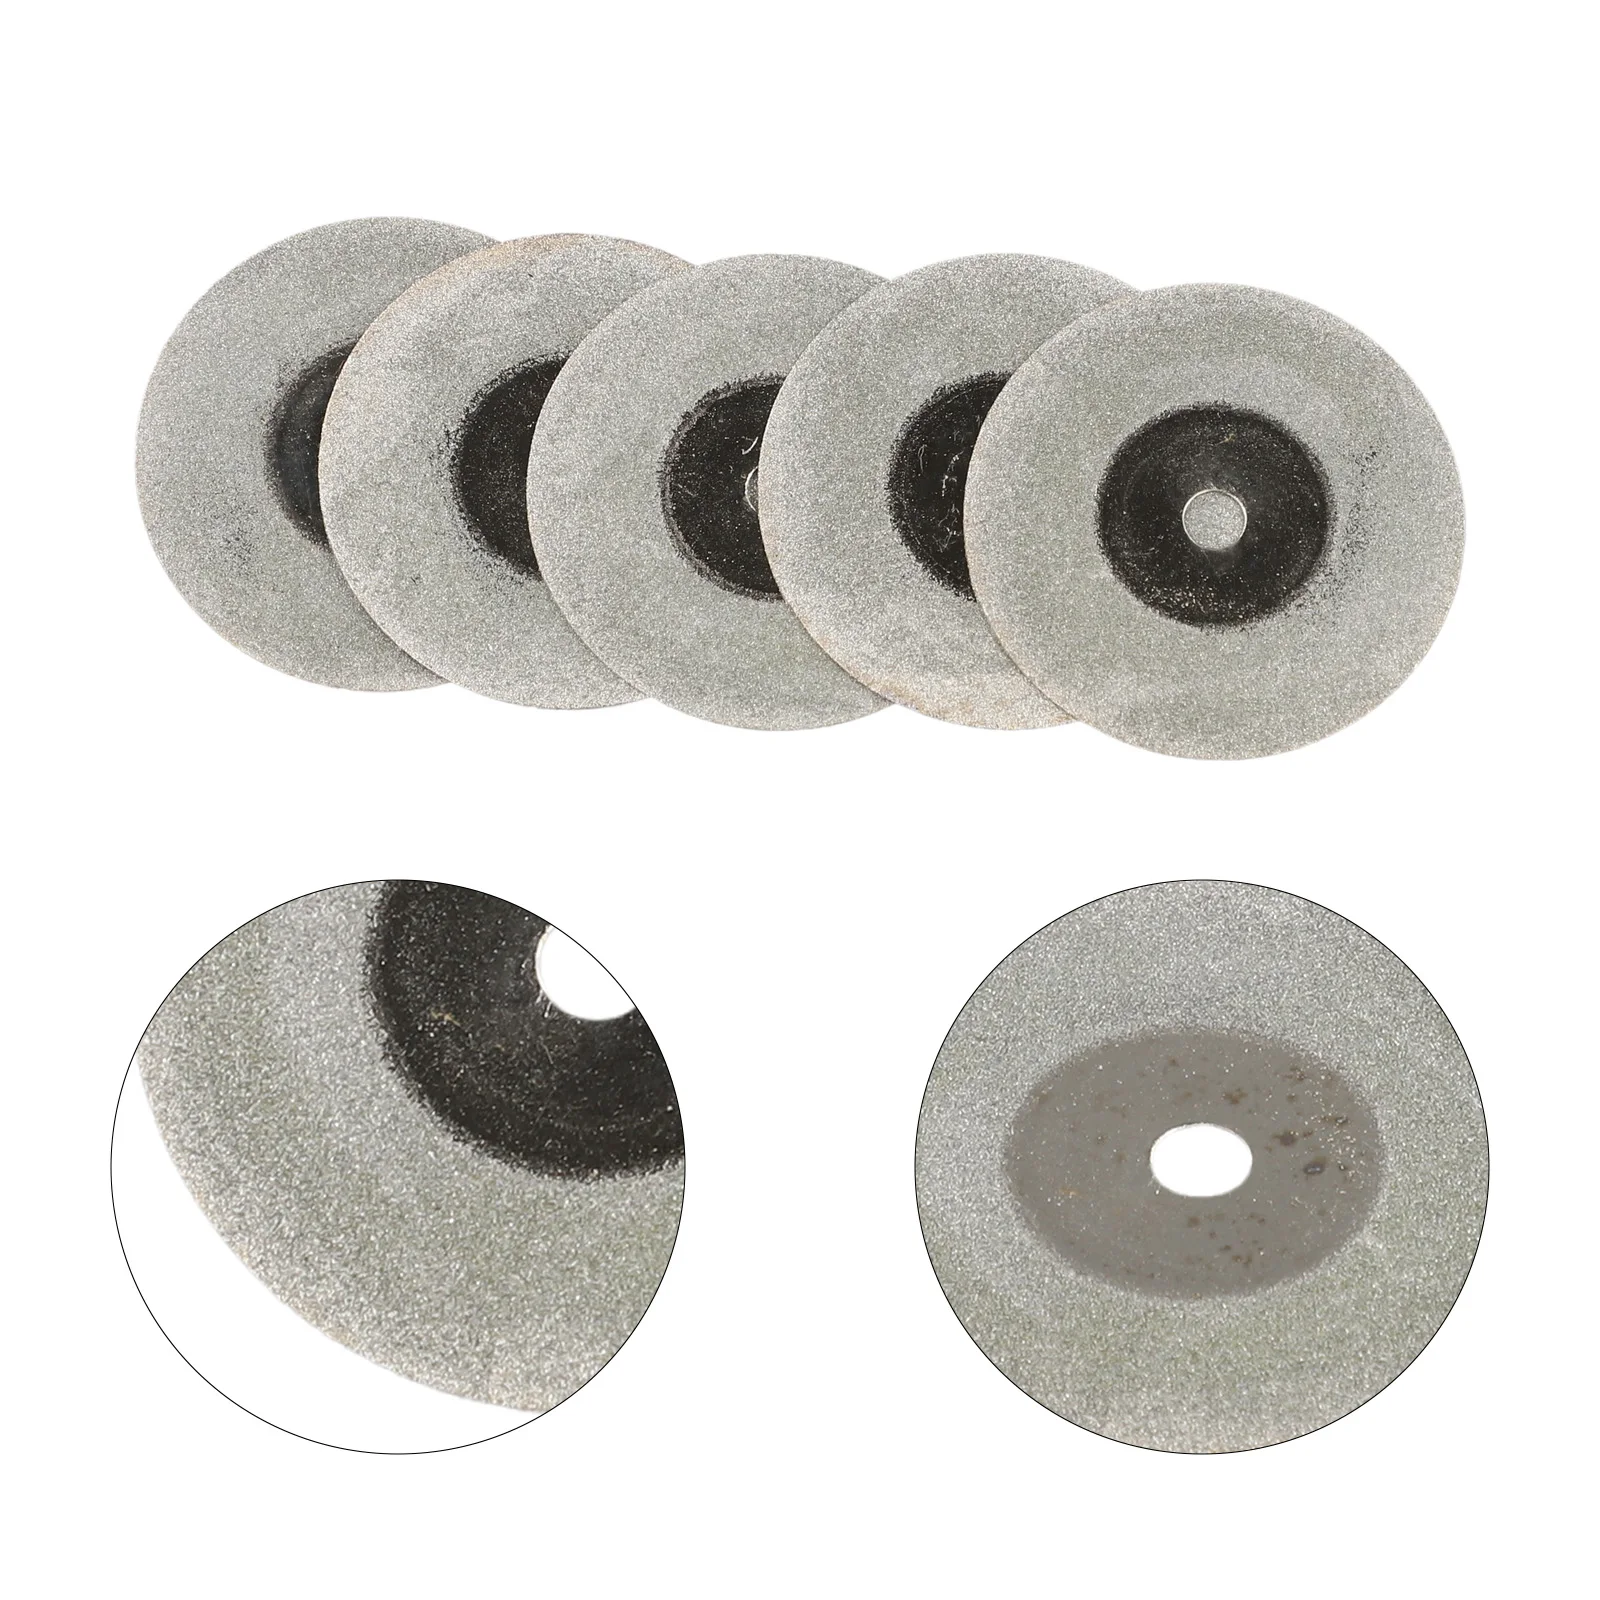 5pcs Cutting Discs 60mm Diamond Saw Blade Cutting Disc Glass Tiles Cutting Blades​ ​power Tools Replacement Accessories remtekey 5pcs smart insert key blade sip22 for jeep renegade emergency key blade replacement